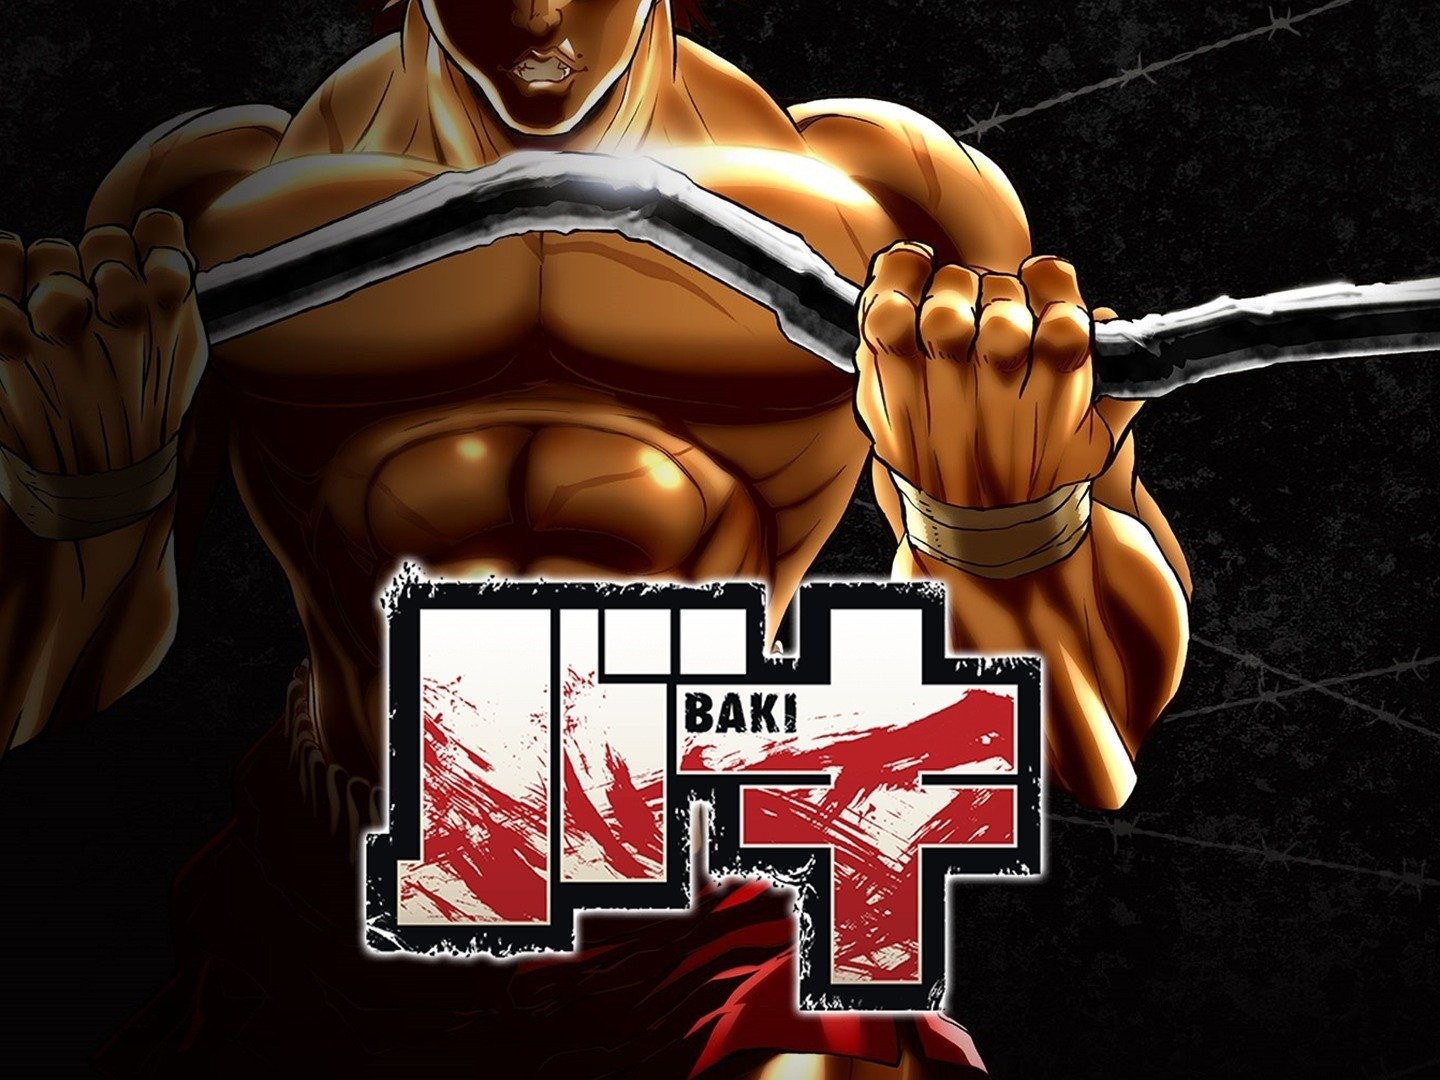 Baki Creator Gifts Rambo: Last Blood an Official Poster